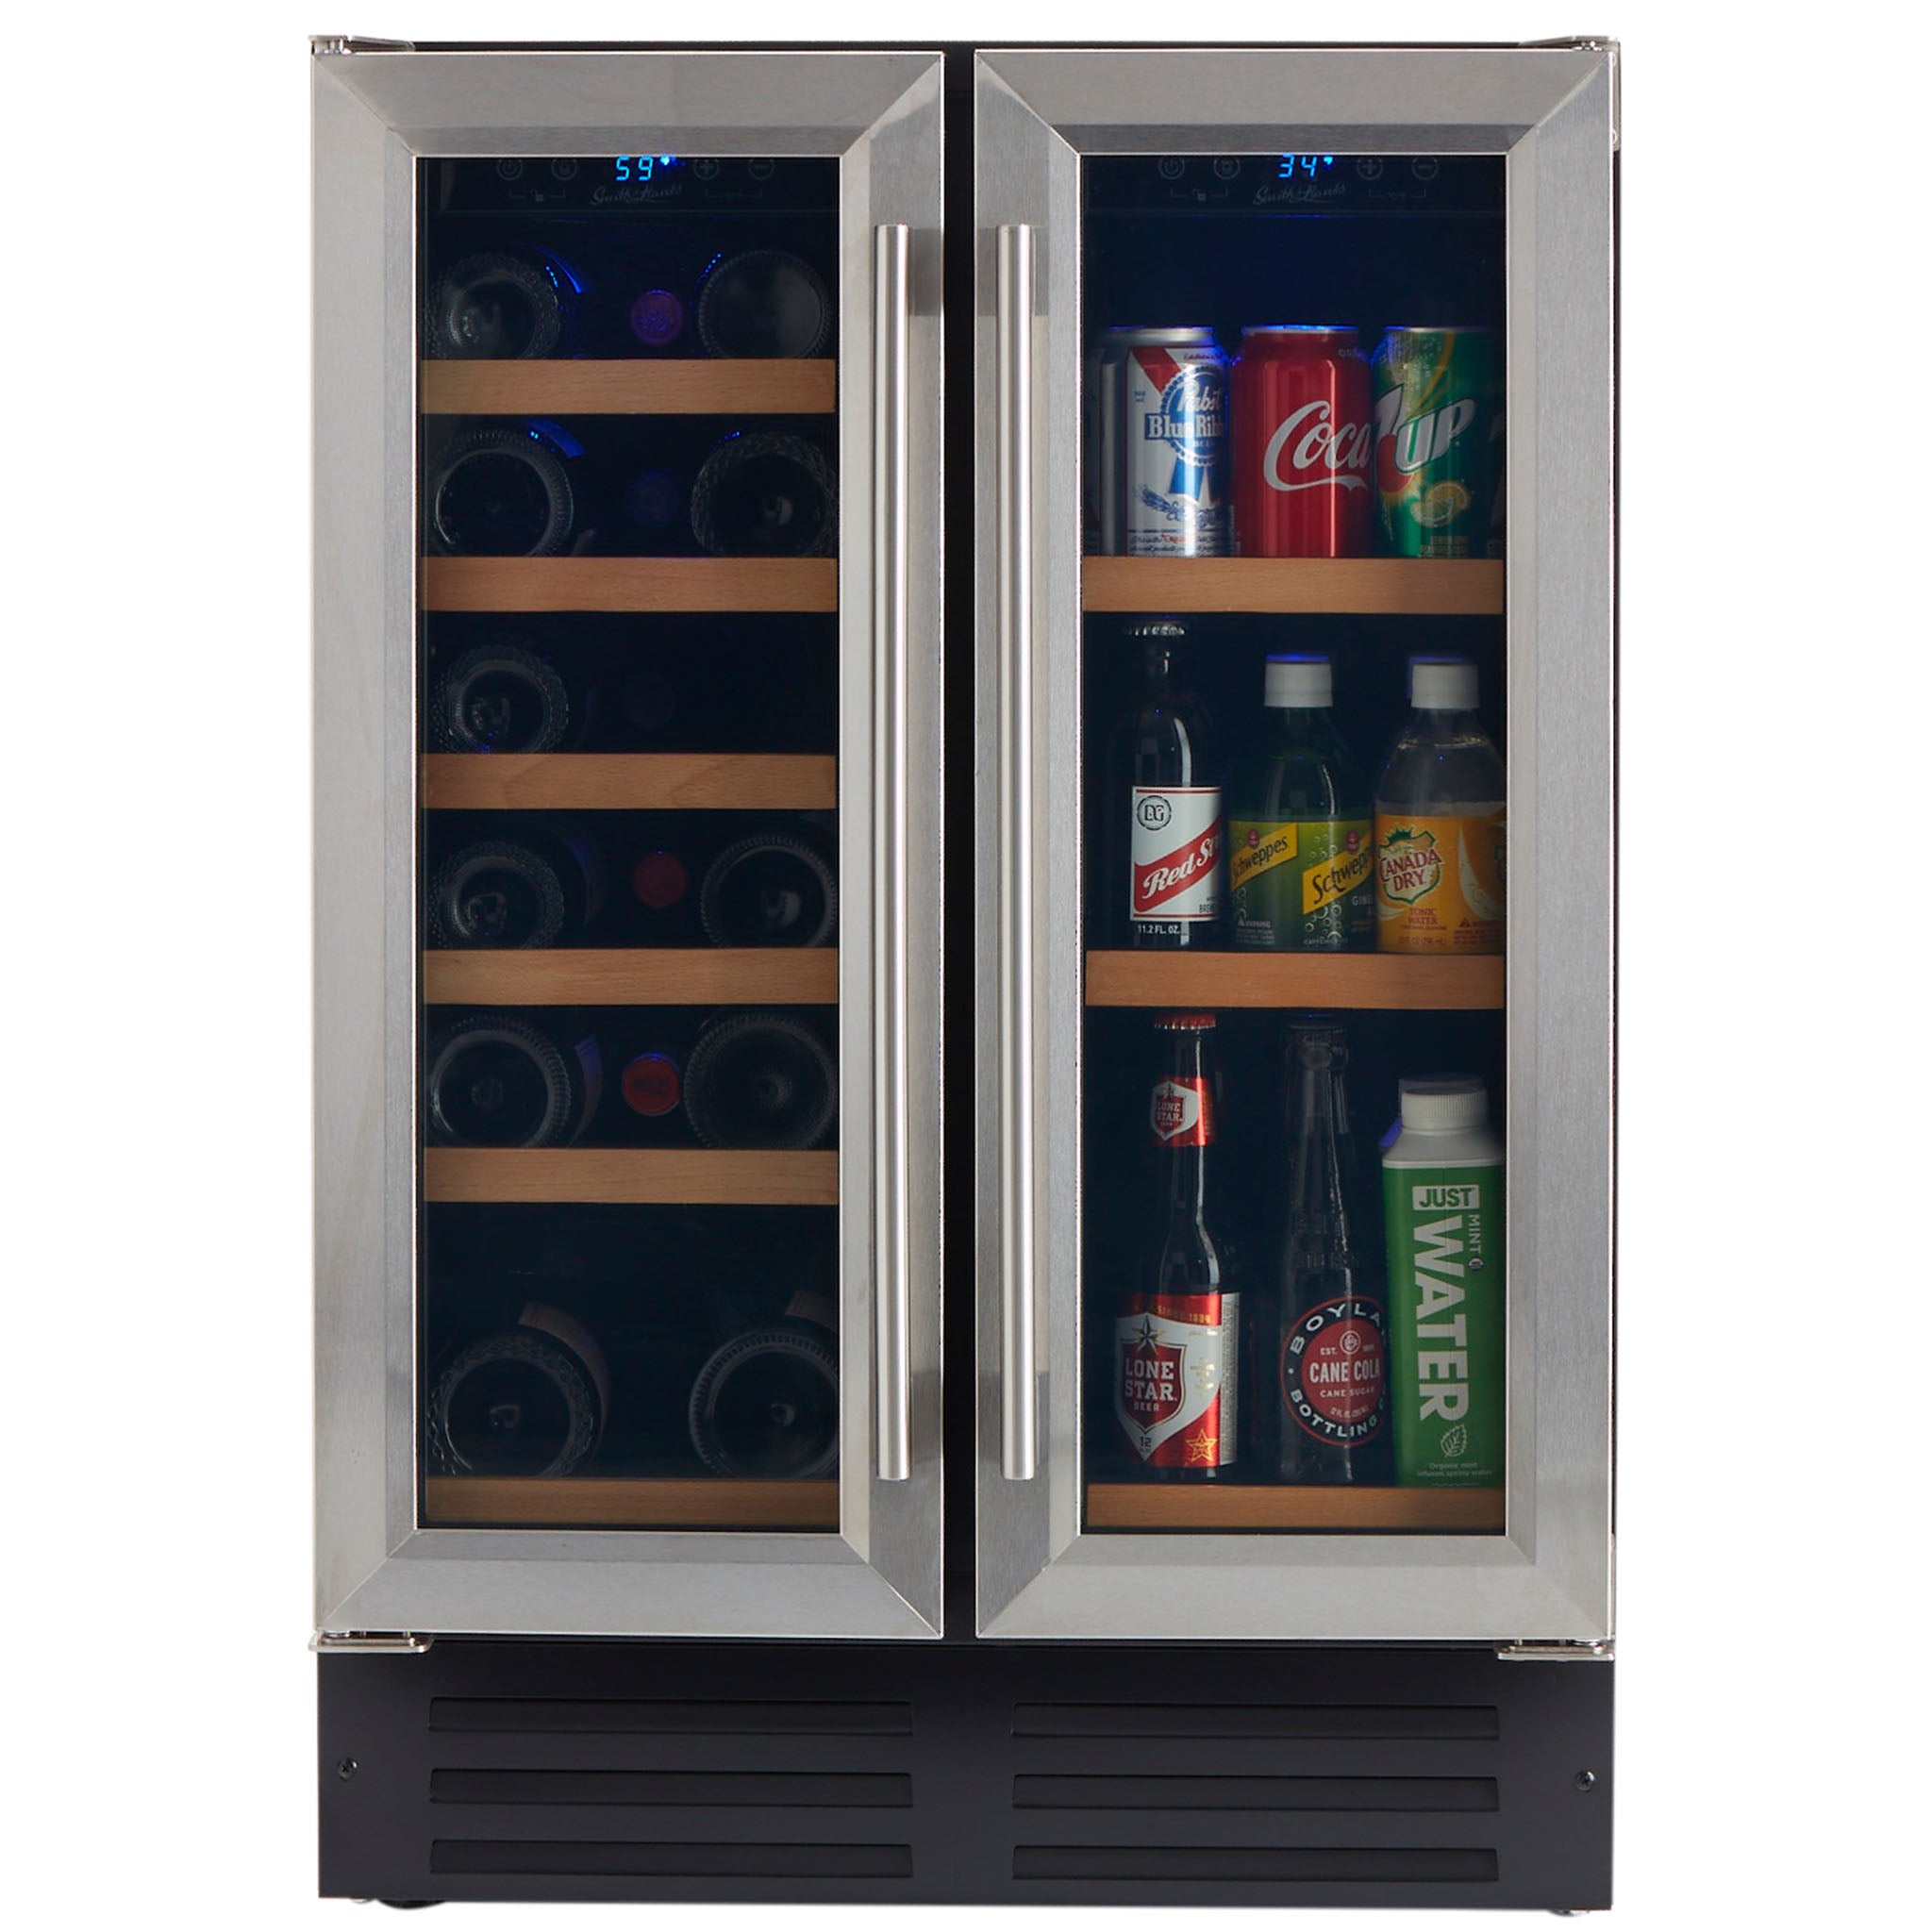 Smith & Hanks - 24" Dual Zone Stainless Steel Trim Under Counter Wine and Beverage Center (RE100055)